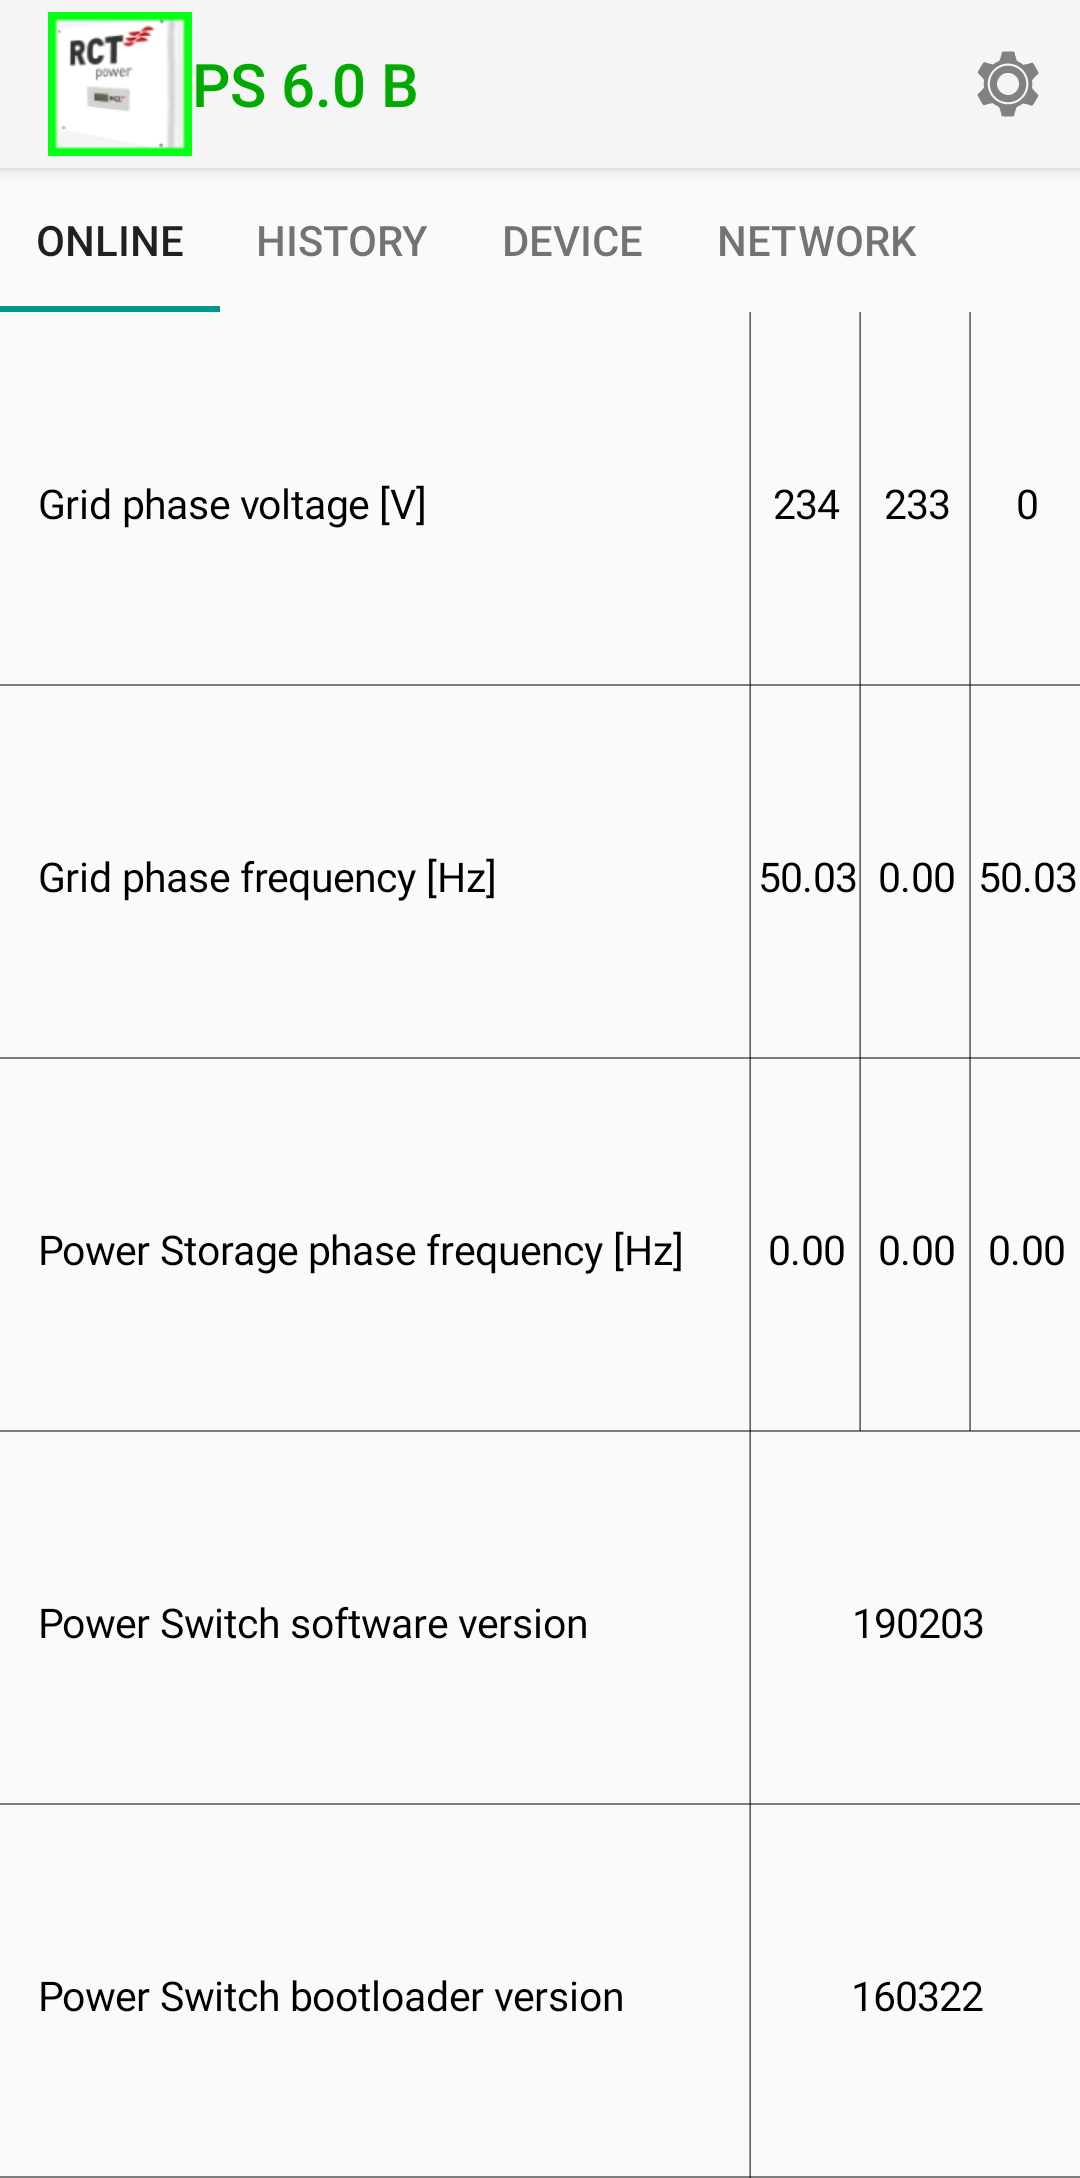 RCT Power App (Android) view of the Power Switch / Power Sensor. The tabular view shows a set of values that are explained in the table following this image.